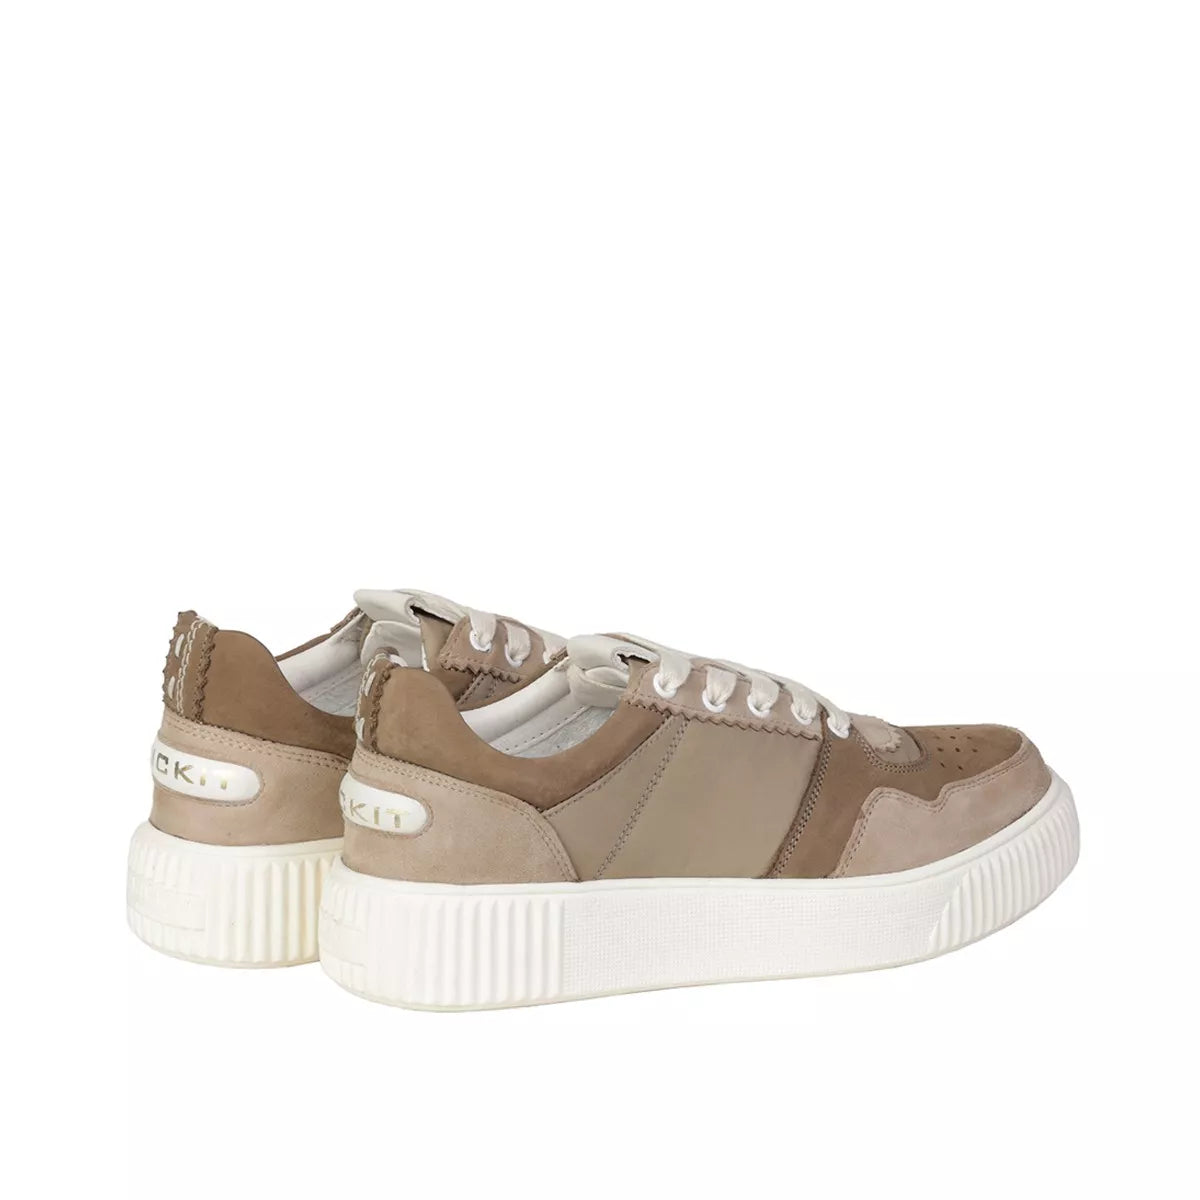 Crickit - MAURA Suede Taupe